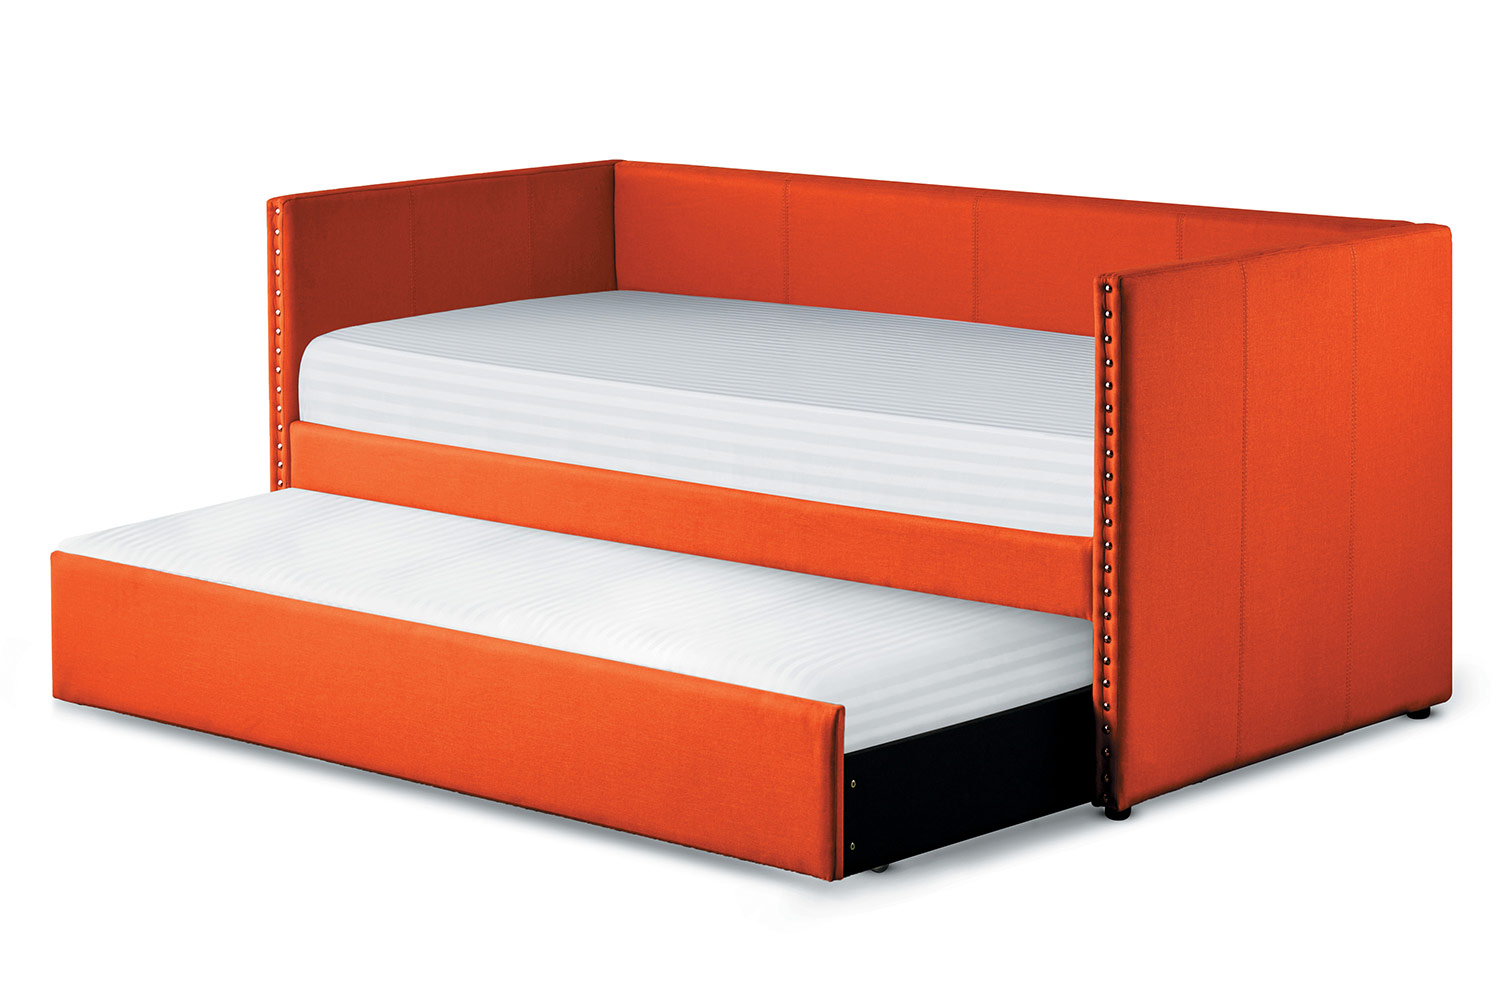 Homelegance Therese Daybed with Trundle - Orange